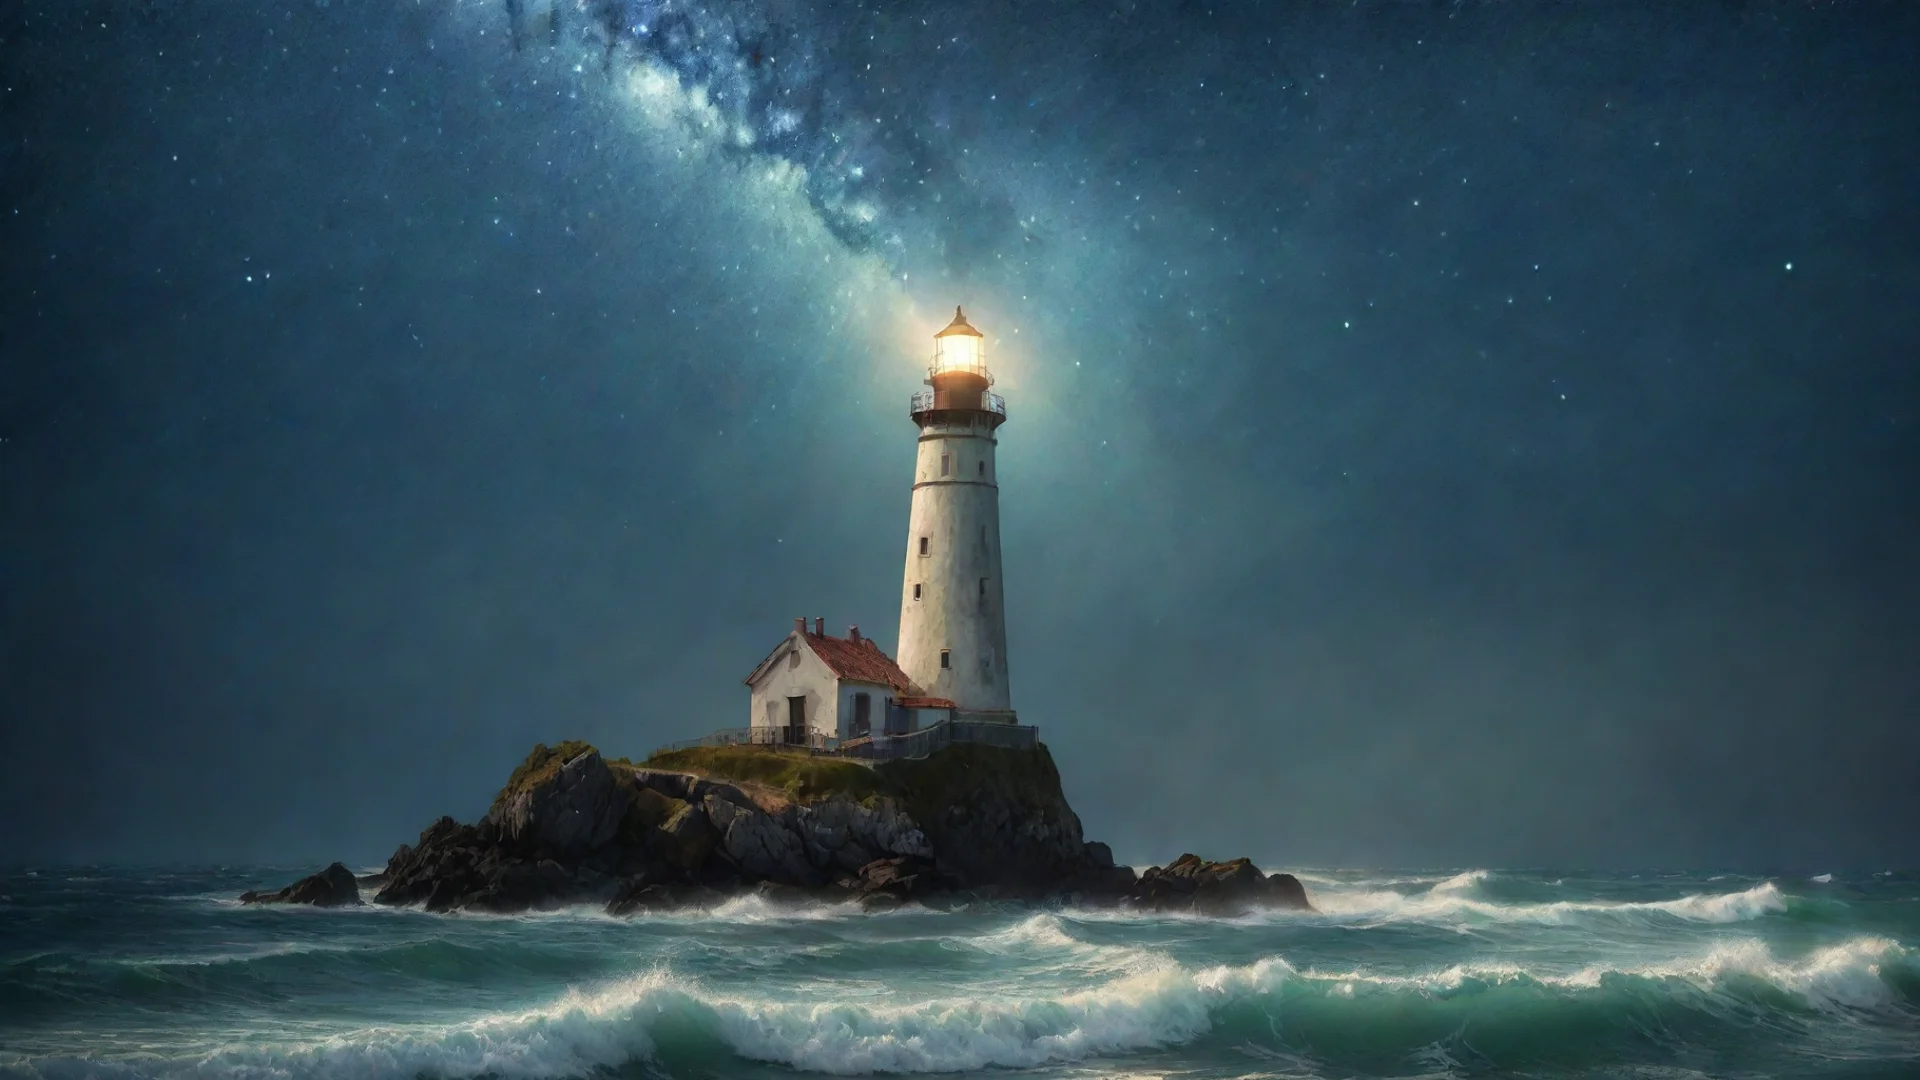 dreamy lighthouse  dramatic lighting van gogh starry night magical atmosphere by renato muccillo a wide